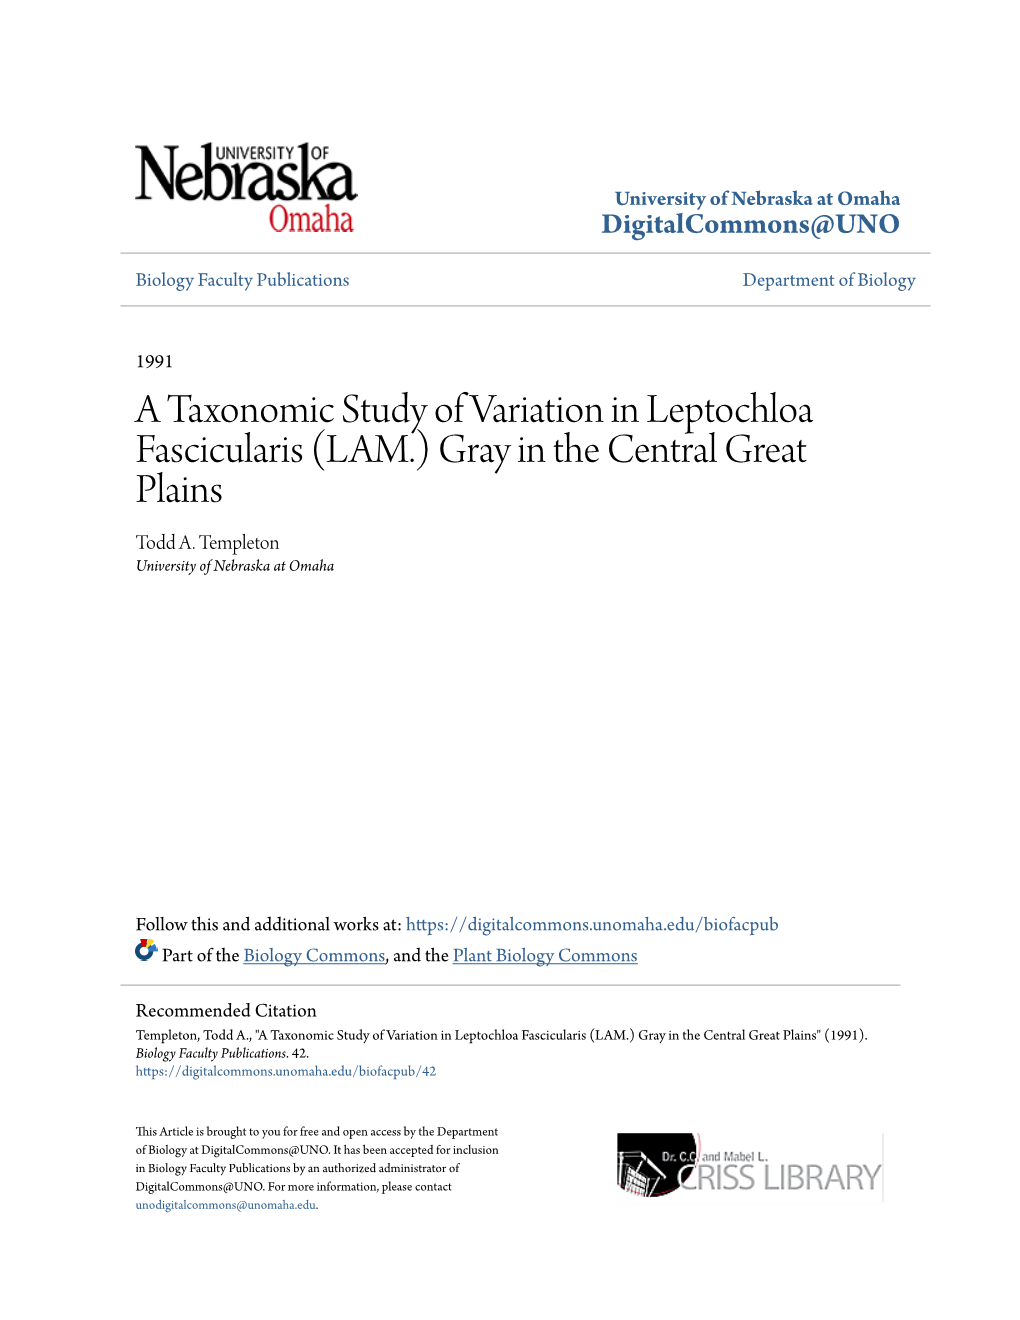 A Taxonomic Study of Variation in Leptochloa Fascicularis (LAM.) Gray in the Central Great Plains Todd A